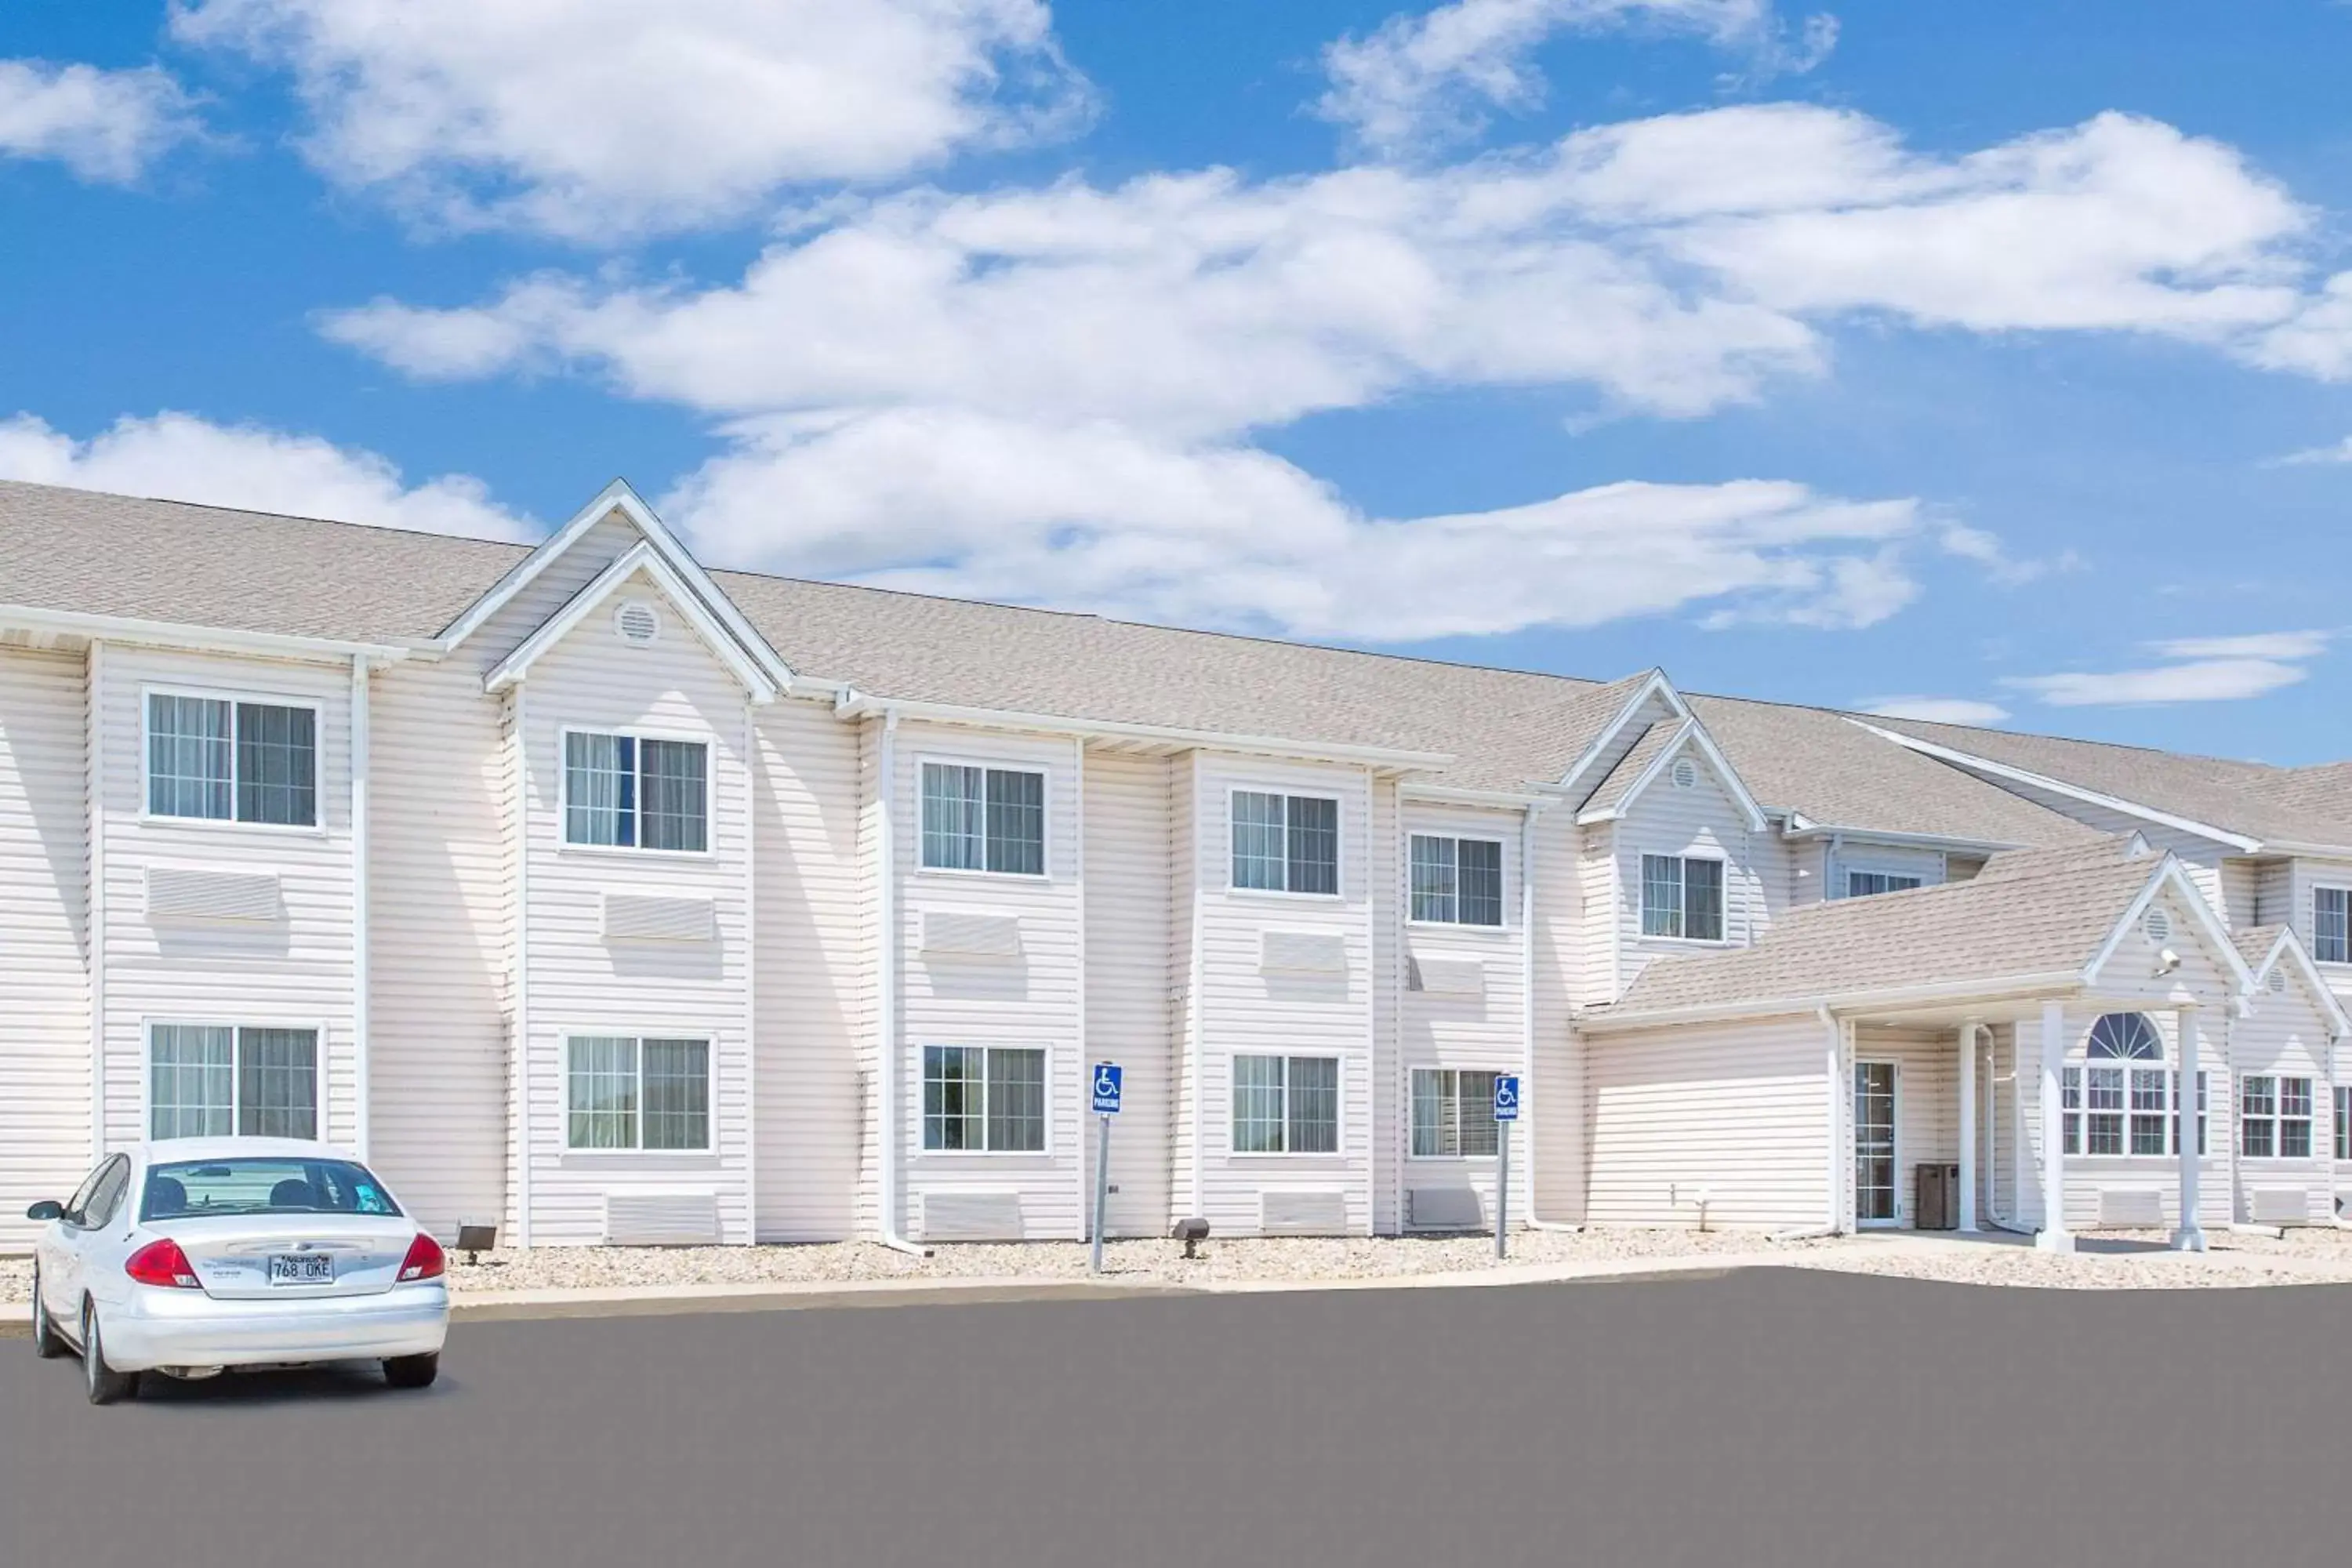 Property Building in Microtel Inn & Suites by Wyndham Colfax